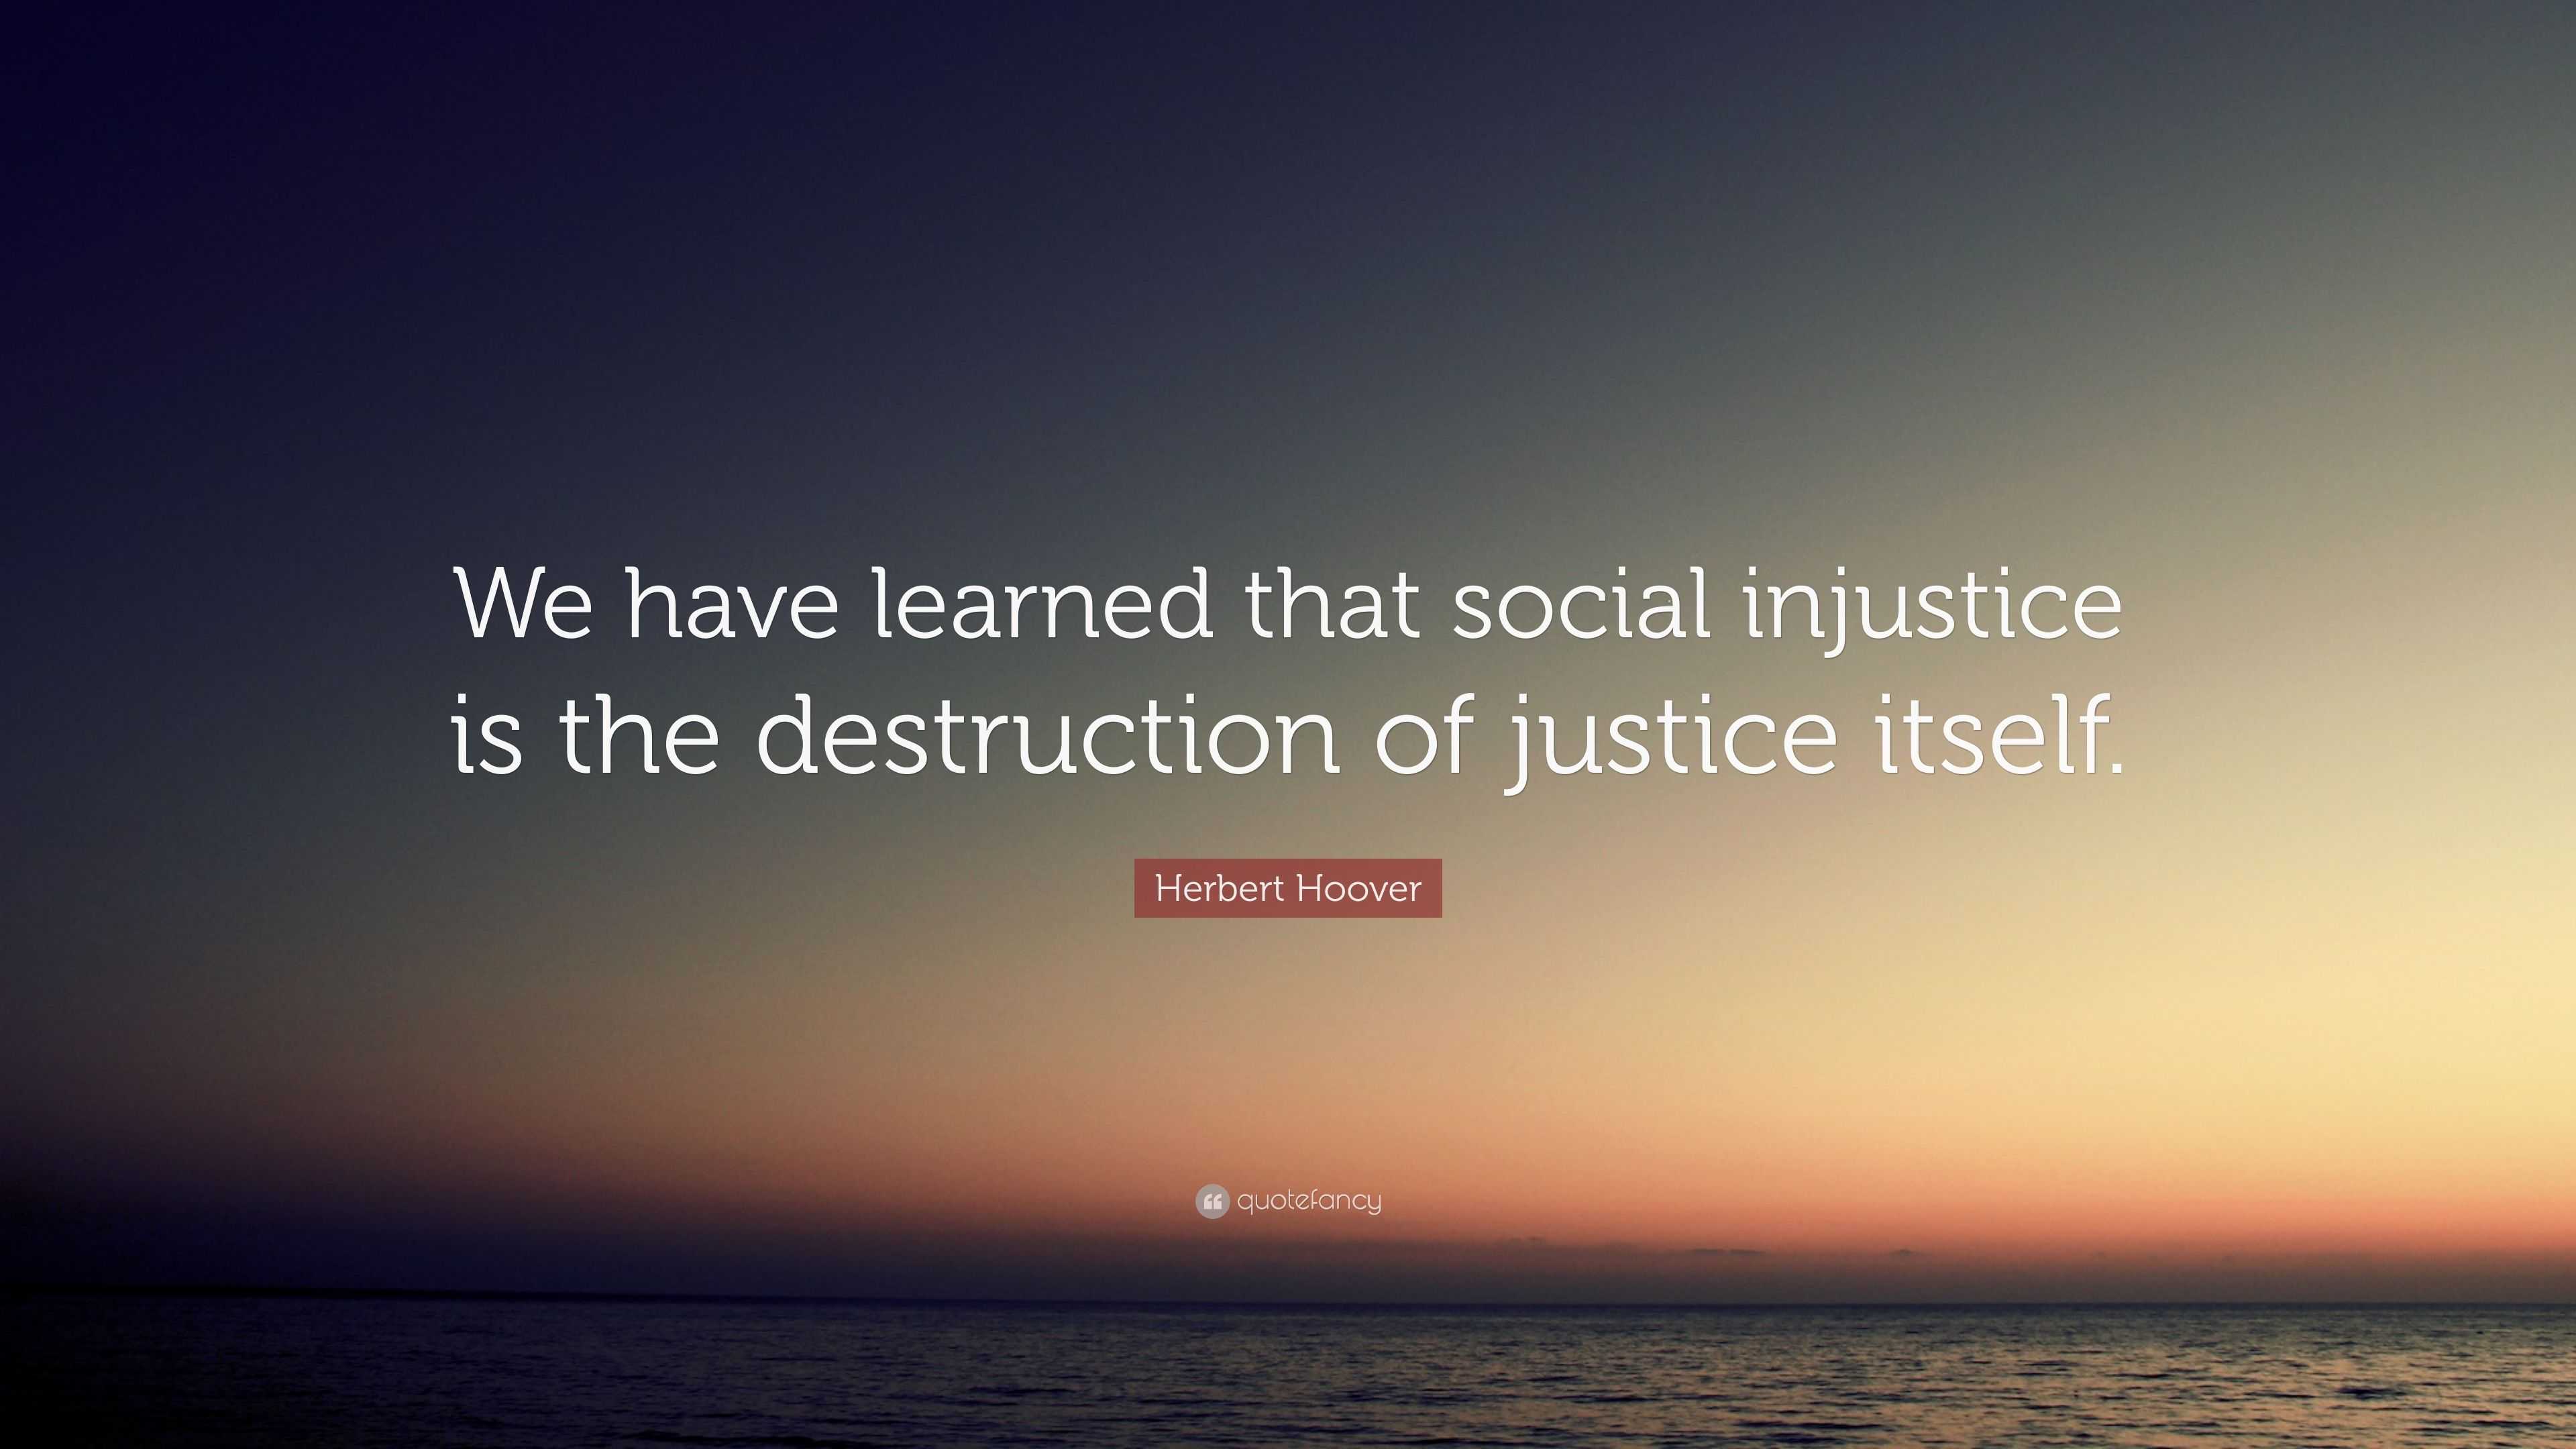 Herbert Hoover Quote: “We have learned that social injustice is the ...